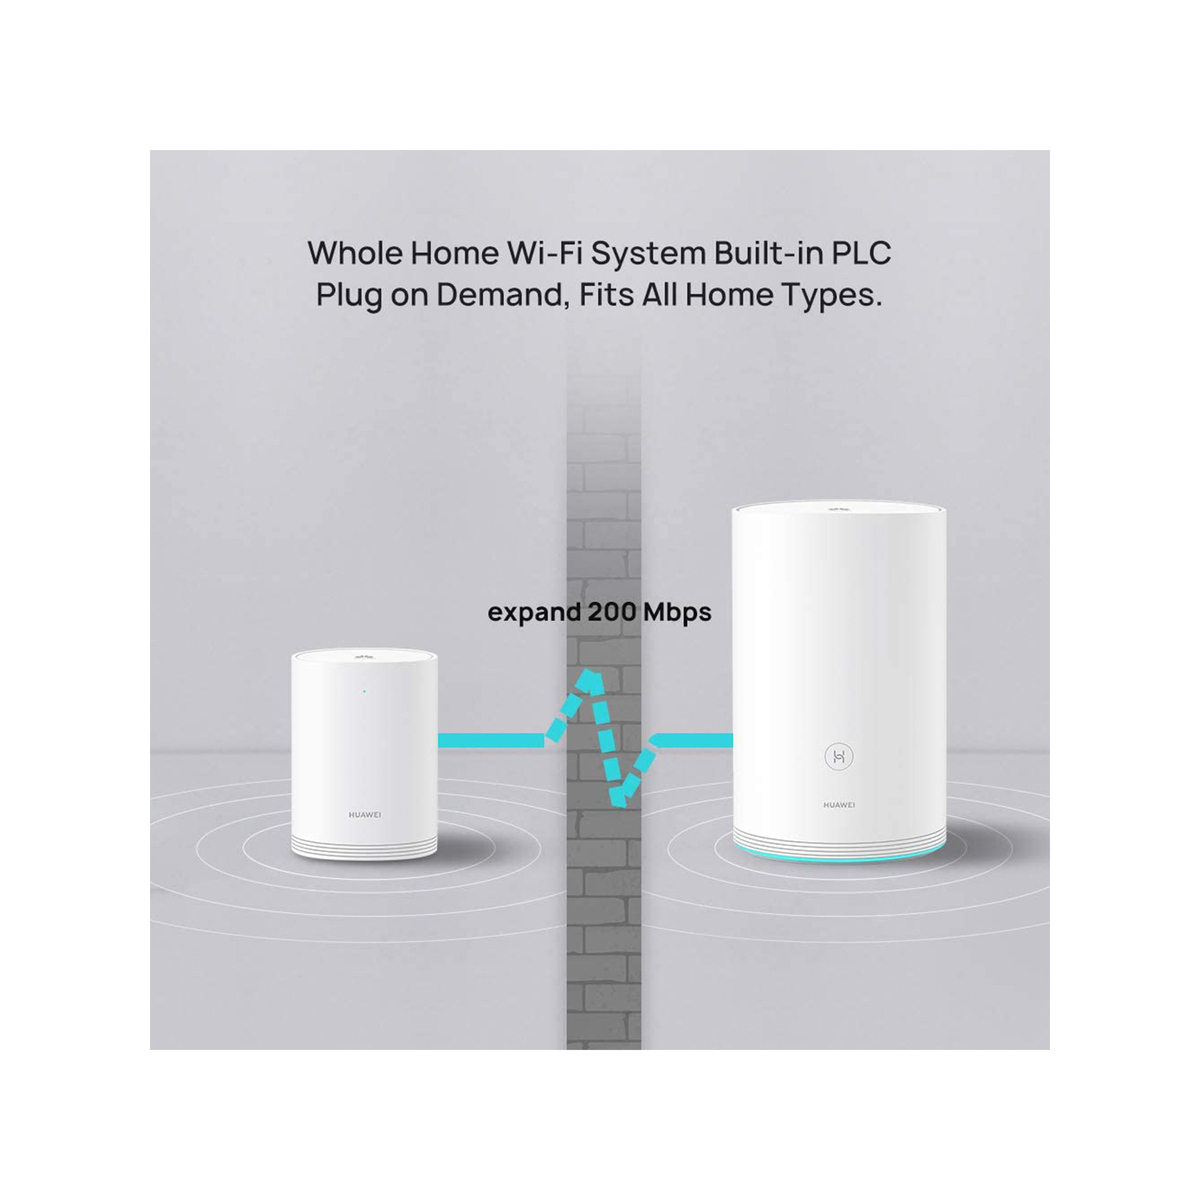 HUAWEI HUW-WS5280-1PLUS1-WHT (1 Base + 1 Satellite) Router, Home Wi-Fi Q2 Pro System